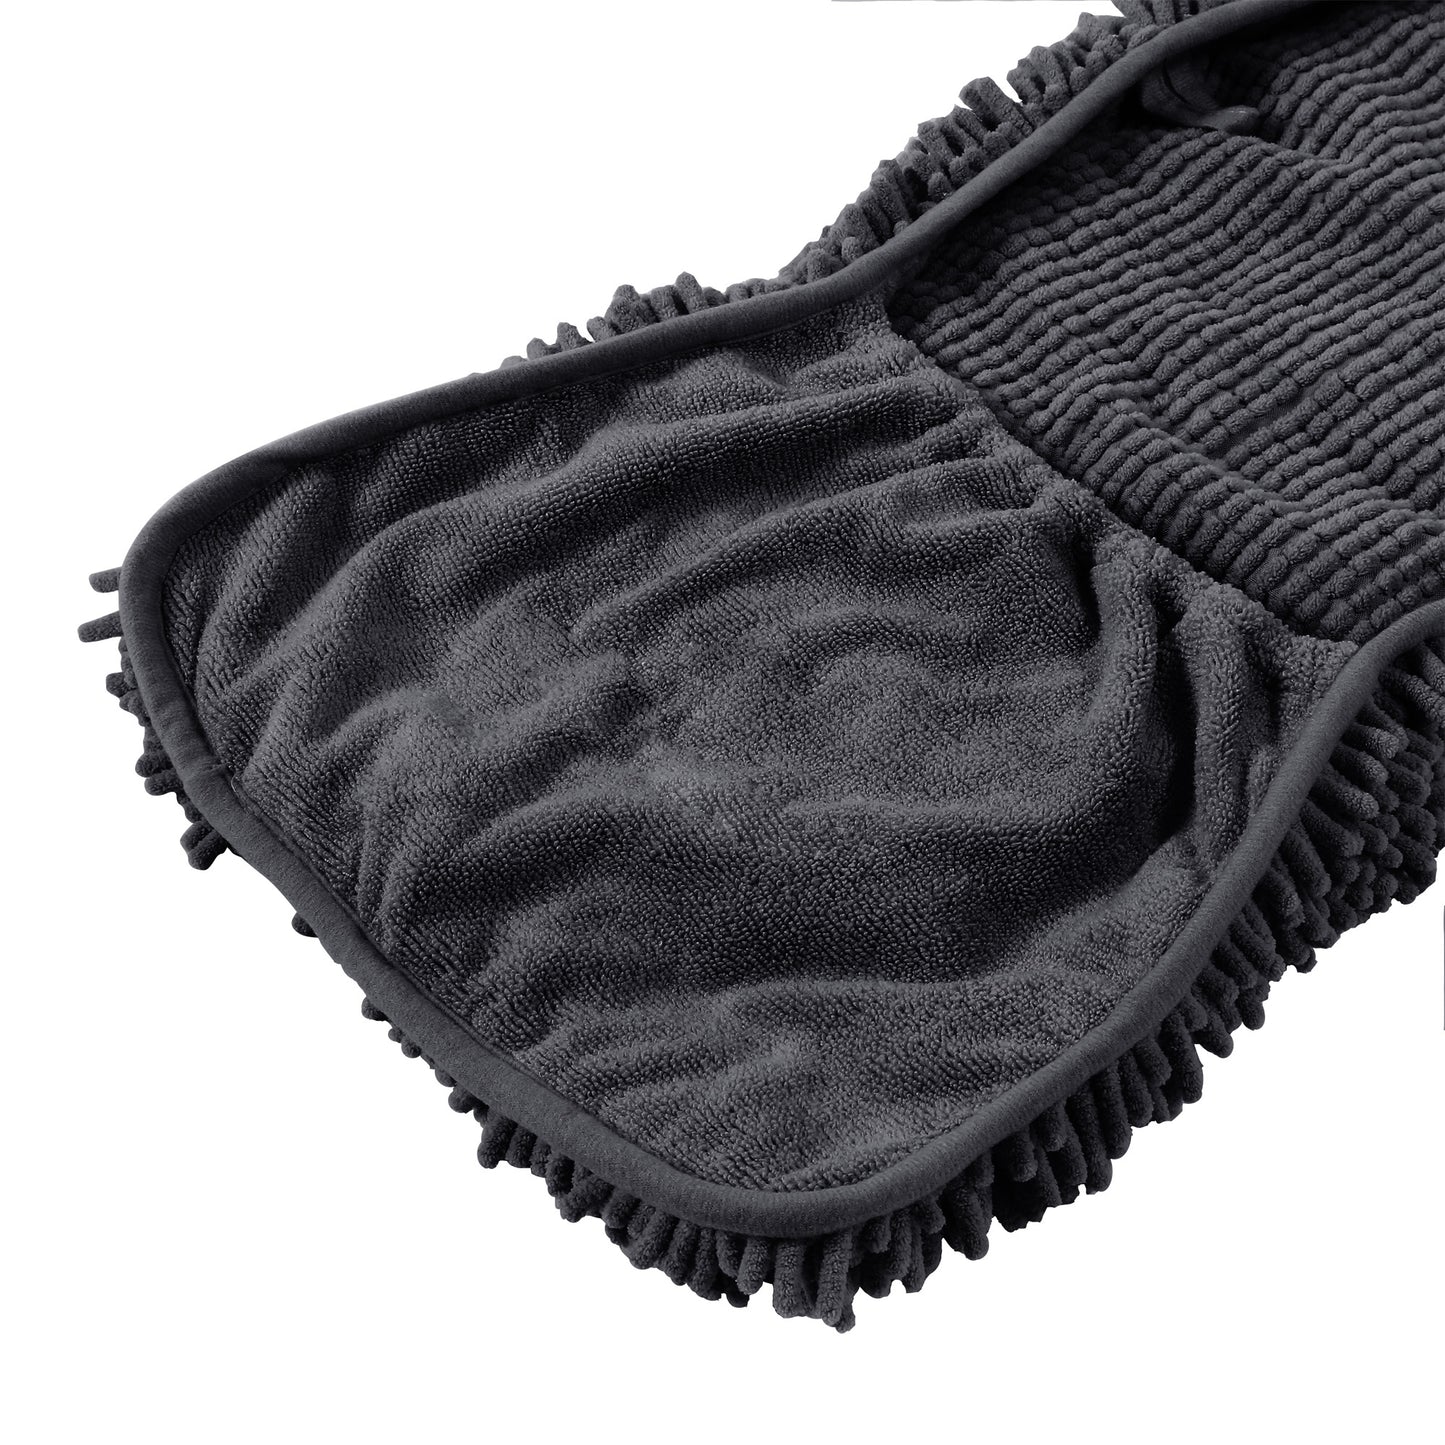 Absorbent Dog Towel, Extra Large (35"x15") Quick Drying Dog Bath Towel with Hand Pockets, Microfiber Shammy Pet Towel for Dog and Cat, Machine Washable (Charcoal)